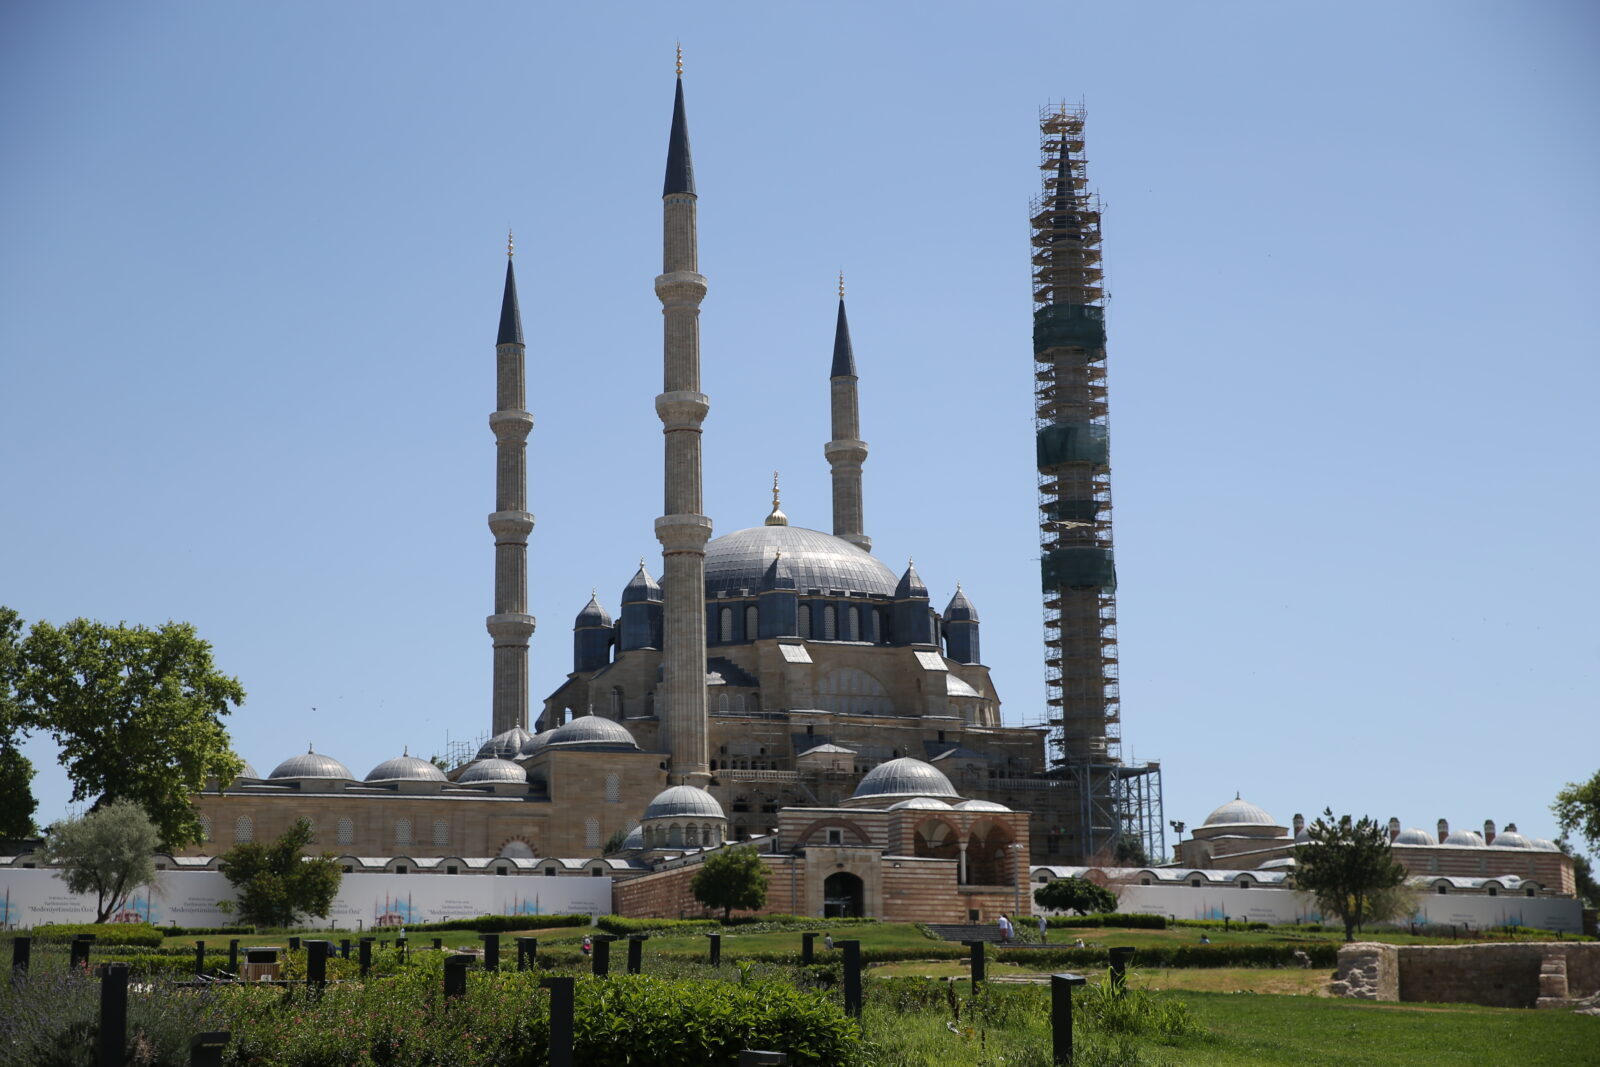 Mimar Sinan's Selimiye Mosque in Edirne sees record visitor numbers